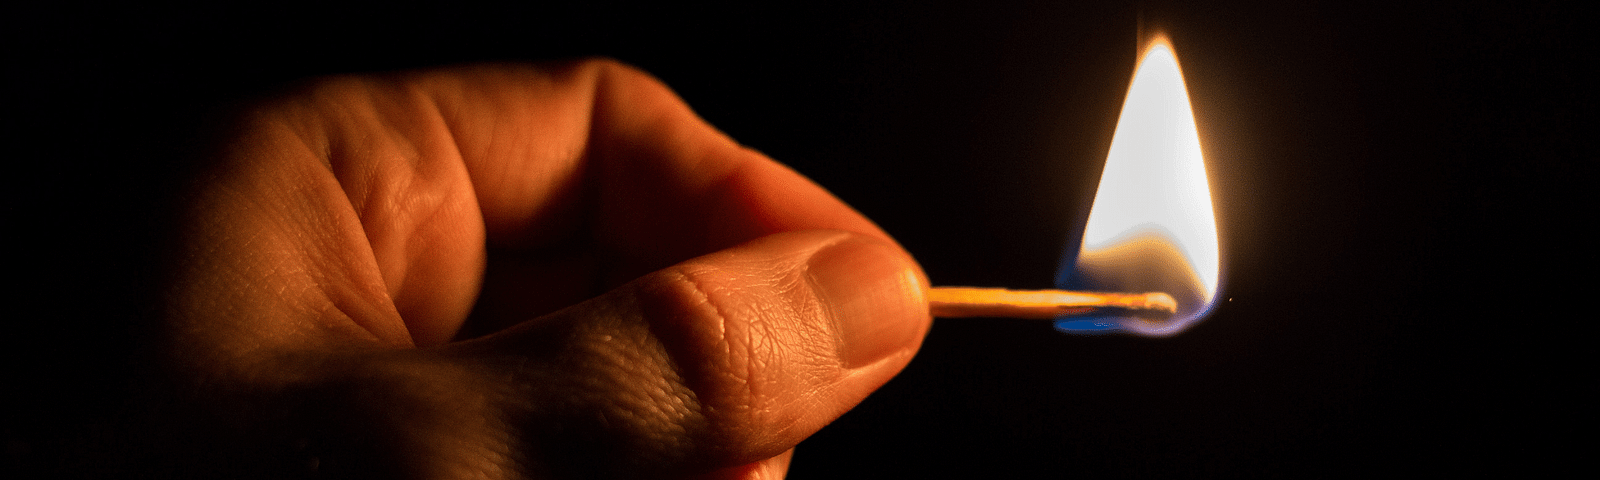 Image of a hand in the deep darkness, holding a flaming match.